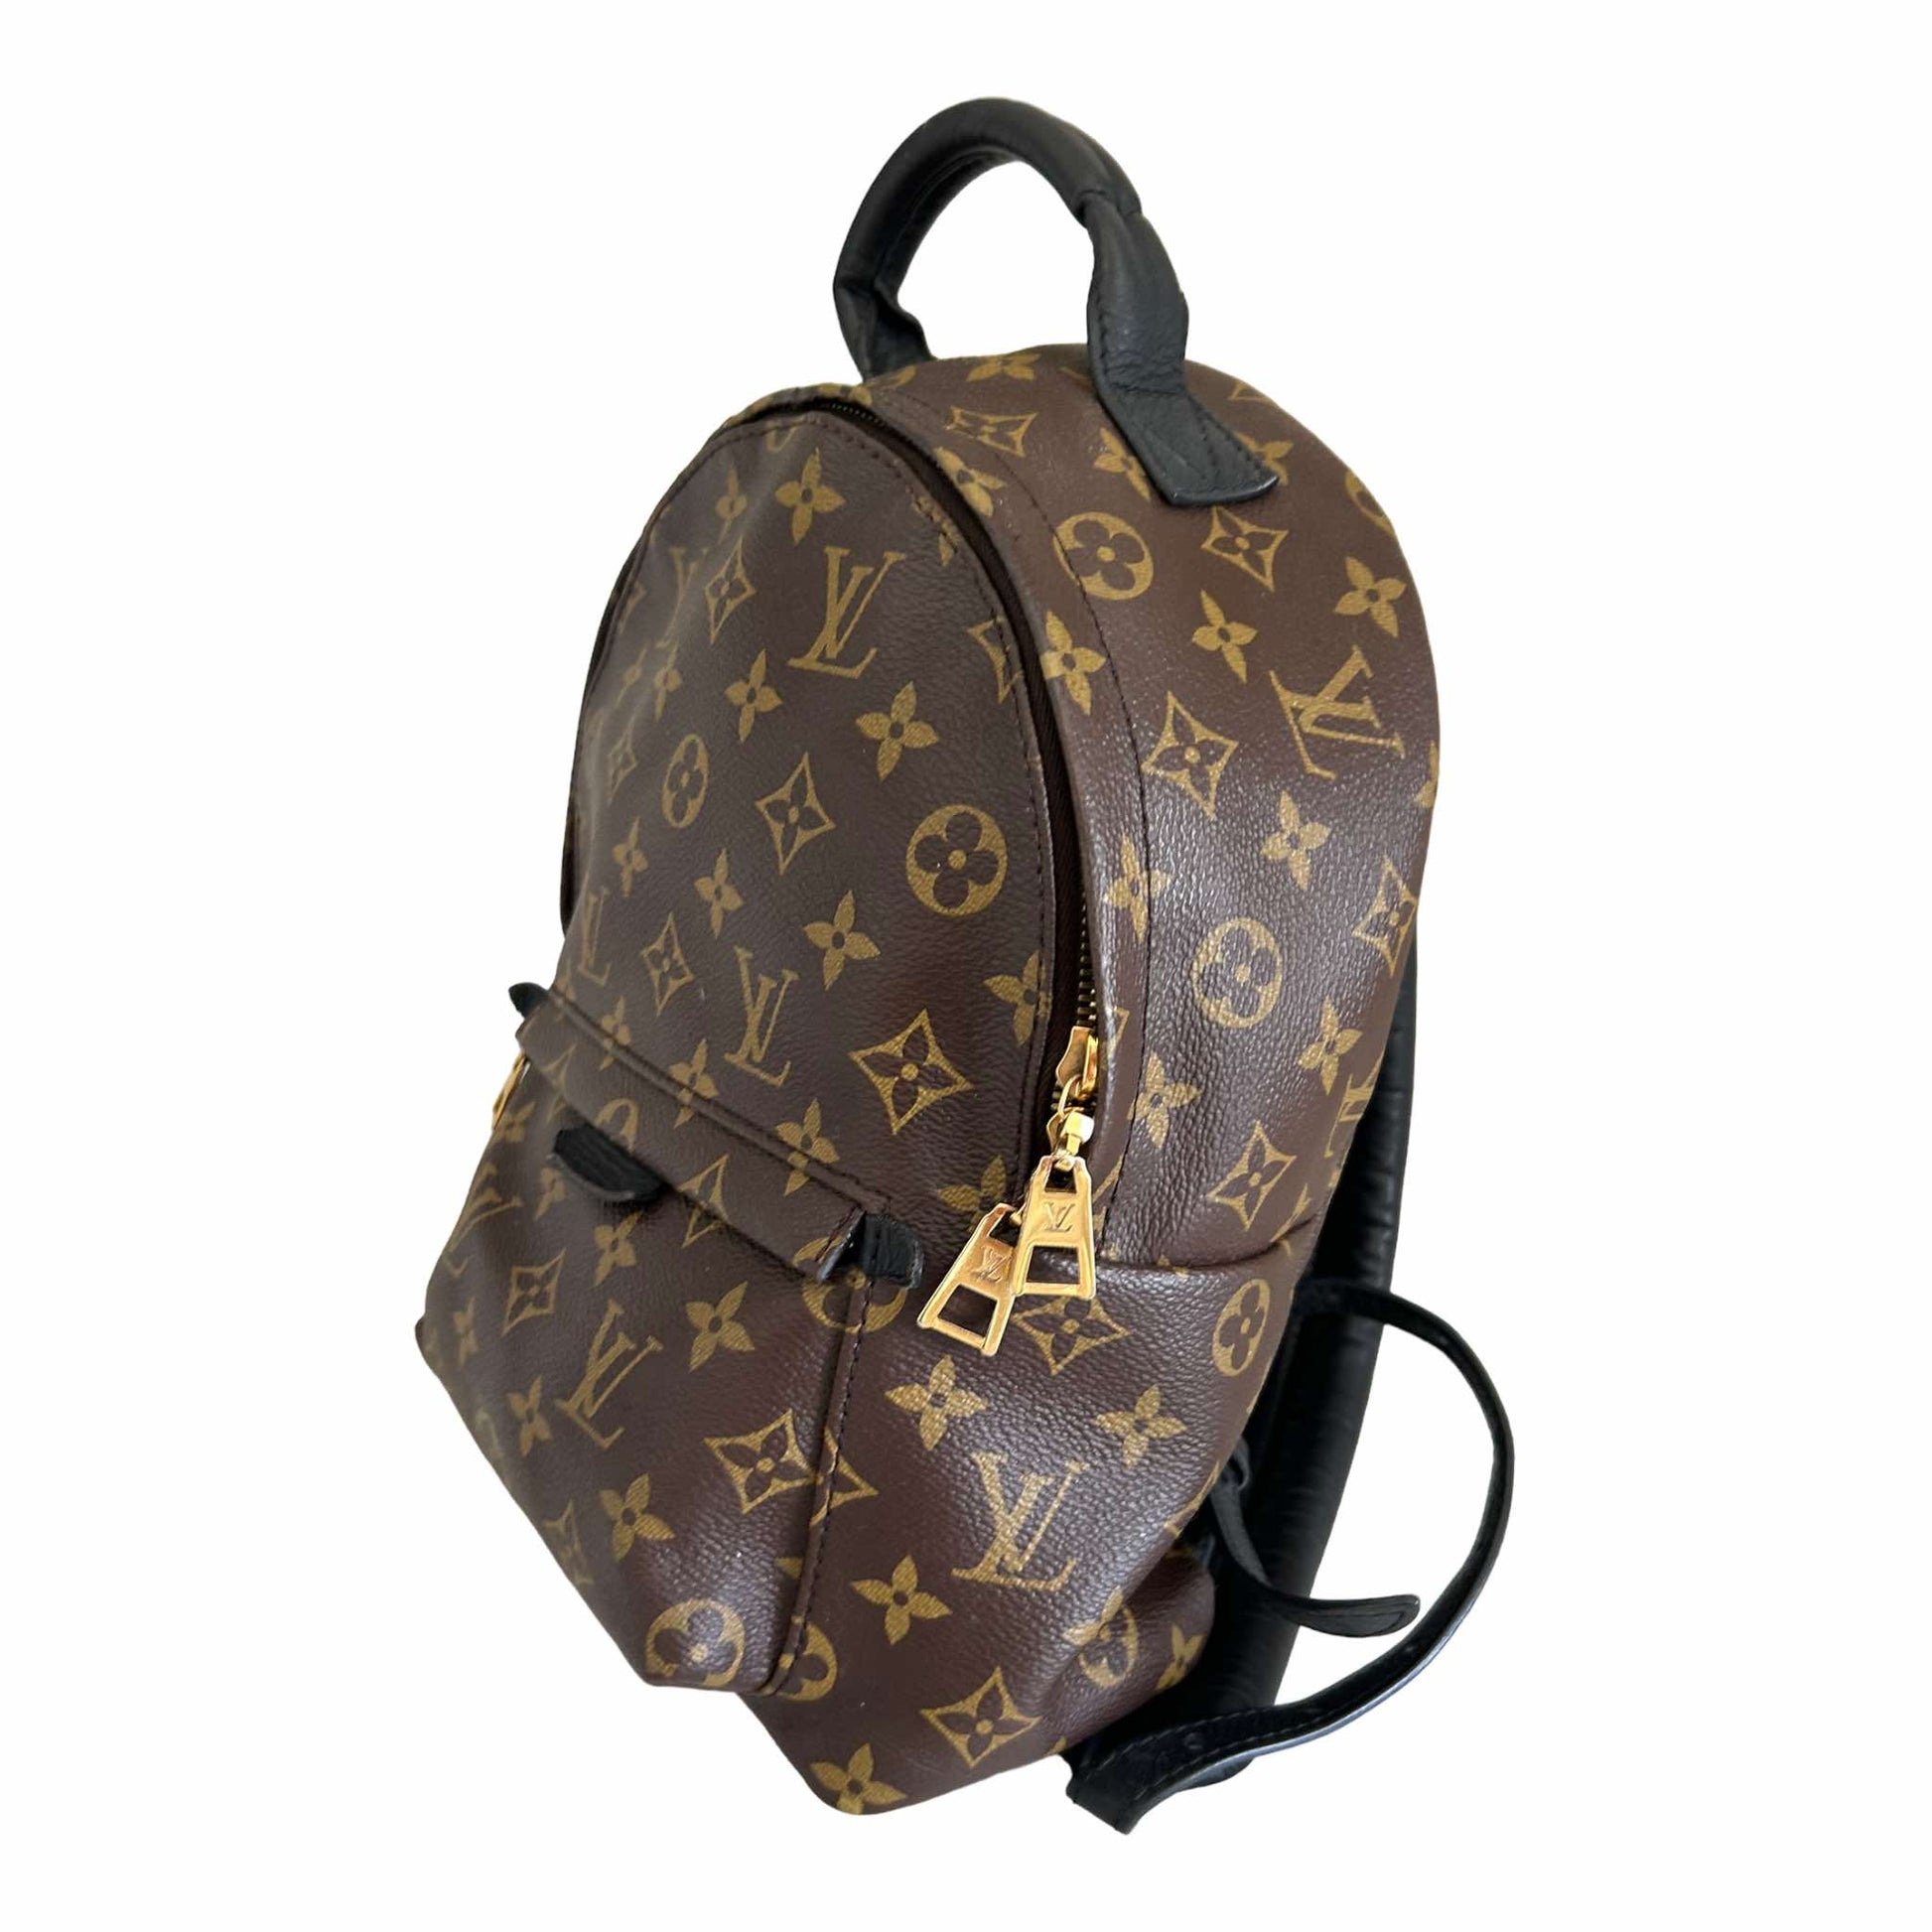 LOUIS VUITTON Palm Springs PM Monogram Black Leather Backpack